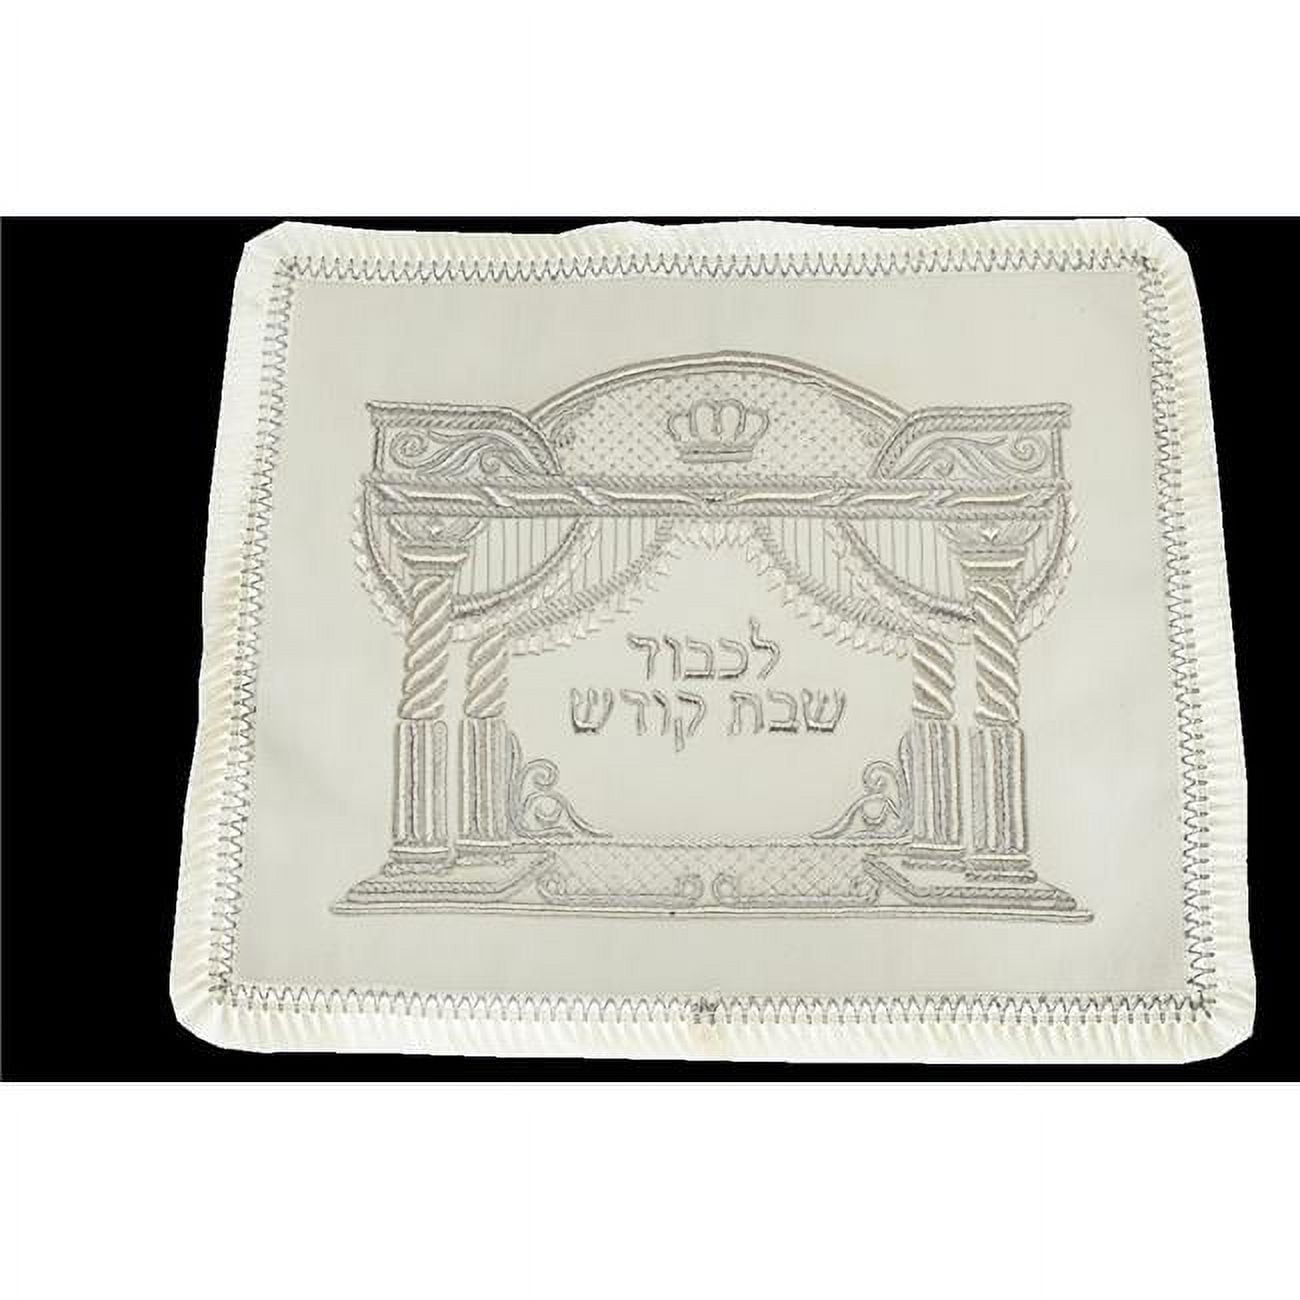 Picture of Nua 58240 Suede Lekovod Shabbos Kodesh Challah Cover, Beige